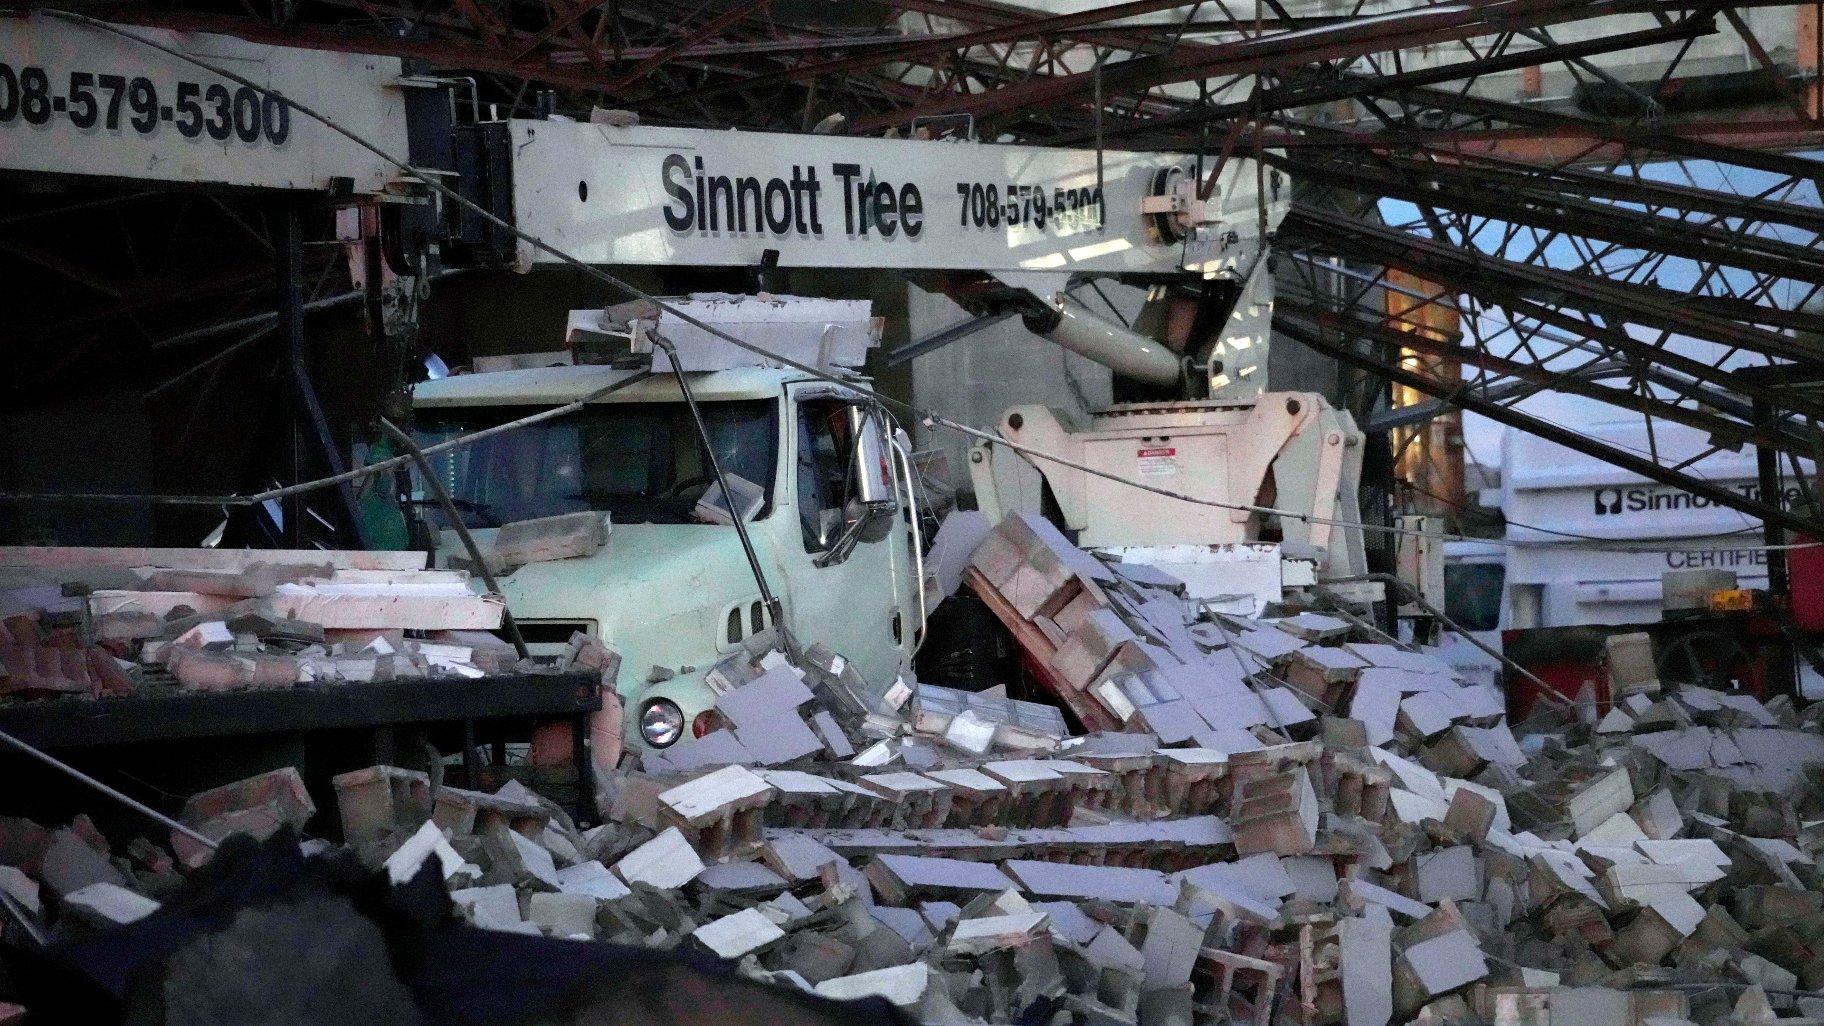 Damage is seen to the Sinnott Tree Service building in McCook, Ill., Wednesday, July 12, 2023. (AP Photo / Nam Y. Huh)